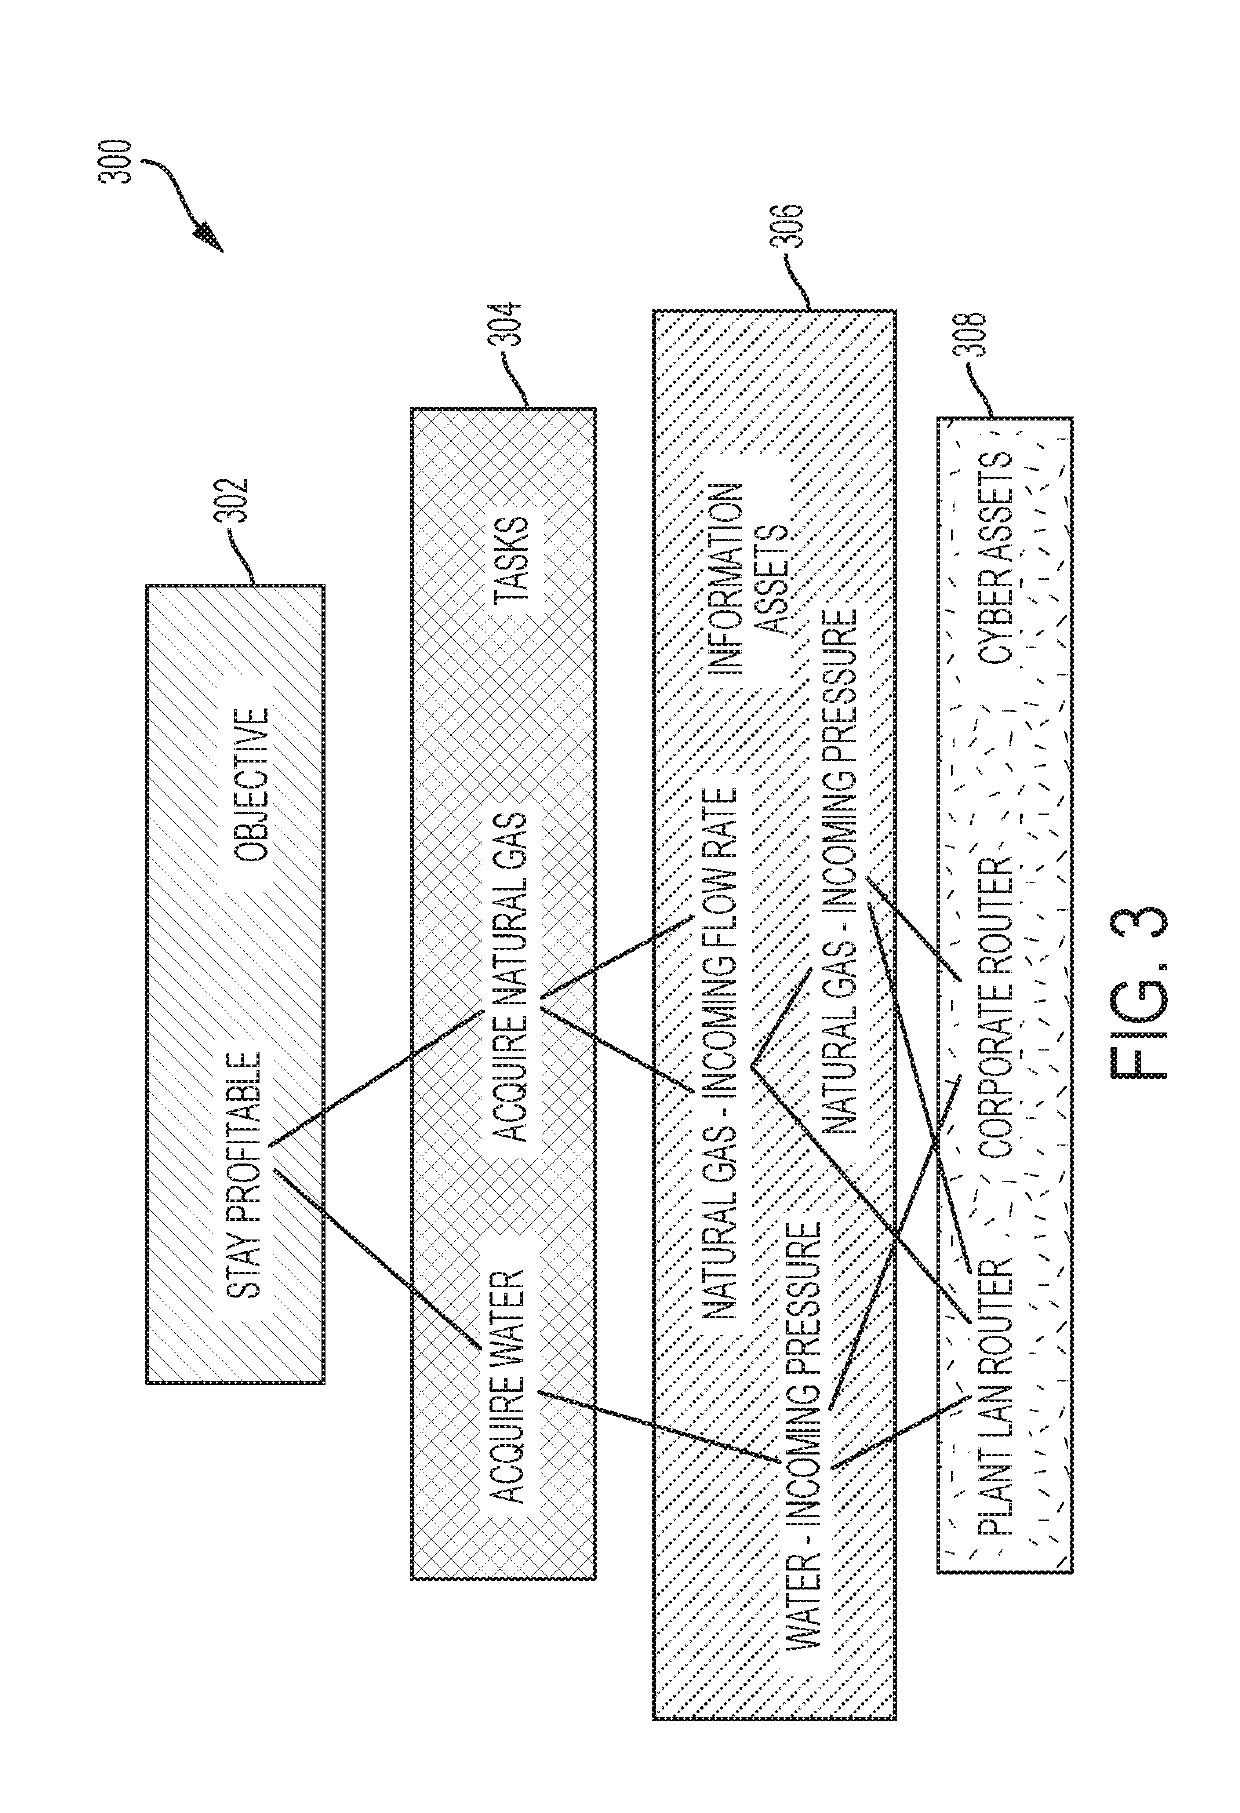 System and method for visualizing and analyzing cyber-attacks using a graph model